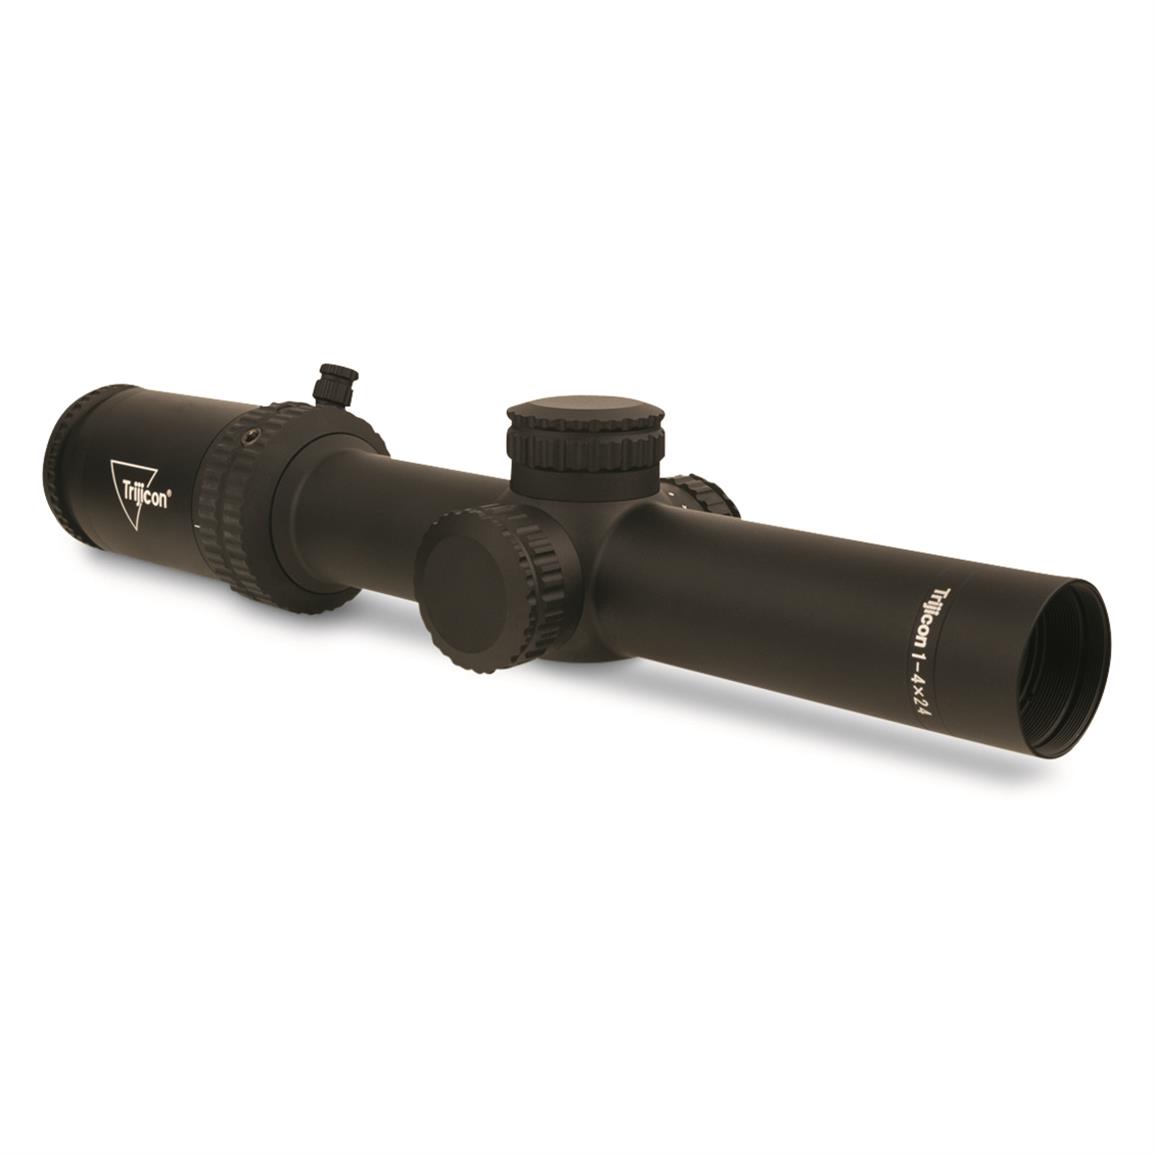 Repositionable magnification lever accommodates different shooting positions and rifle configurations